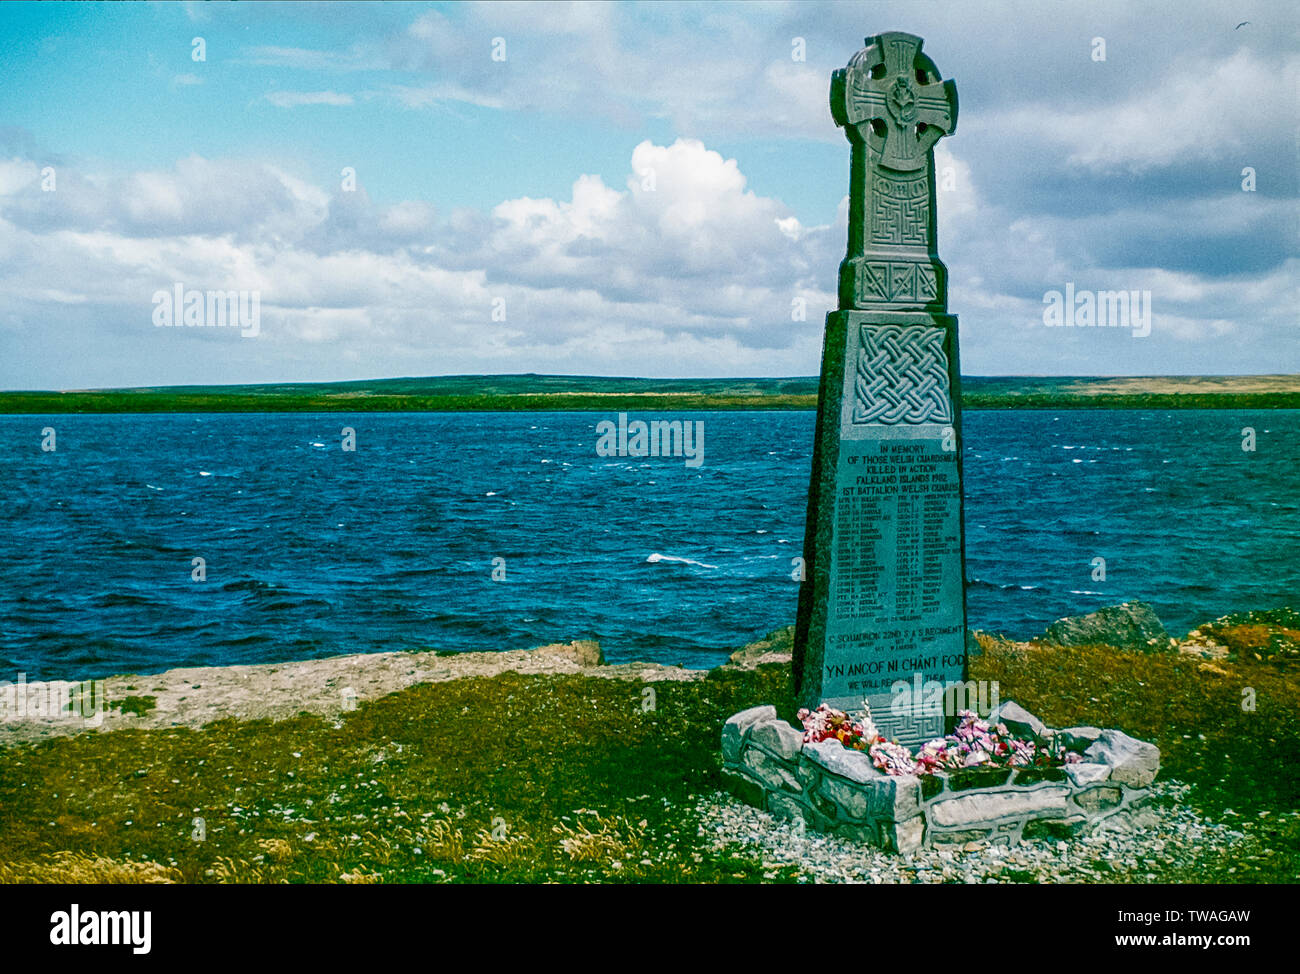 Falkland Islands 1985. The Welsh Guards war memorial at the hamlet of Fitzroy on West Falkland that was the site of the sinking of the Sir Galahad troop ship by the Argentine airforce during the 1982 Falklands-Argentine war Stock Photo